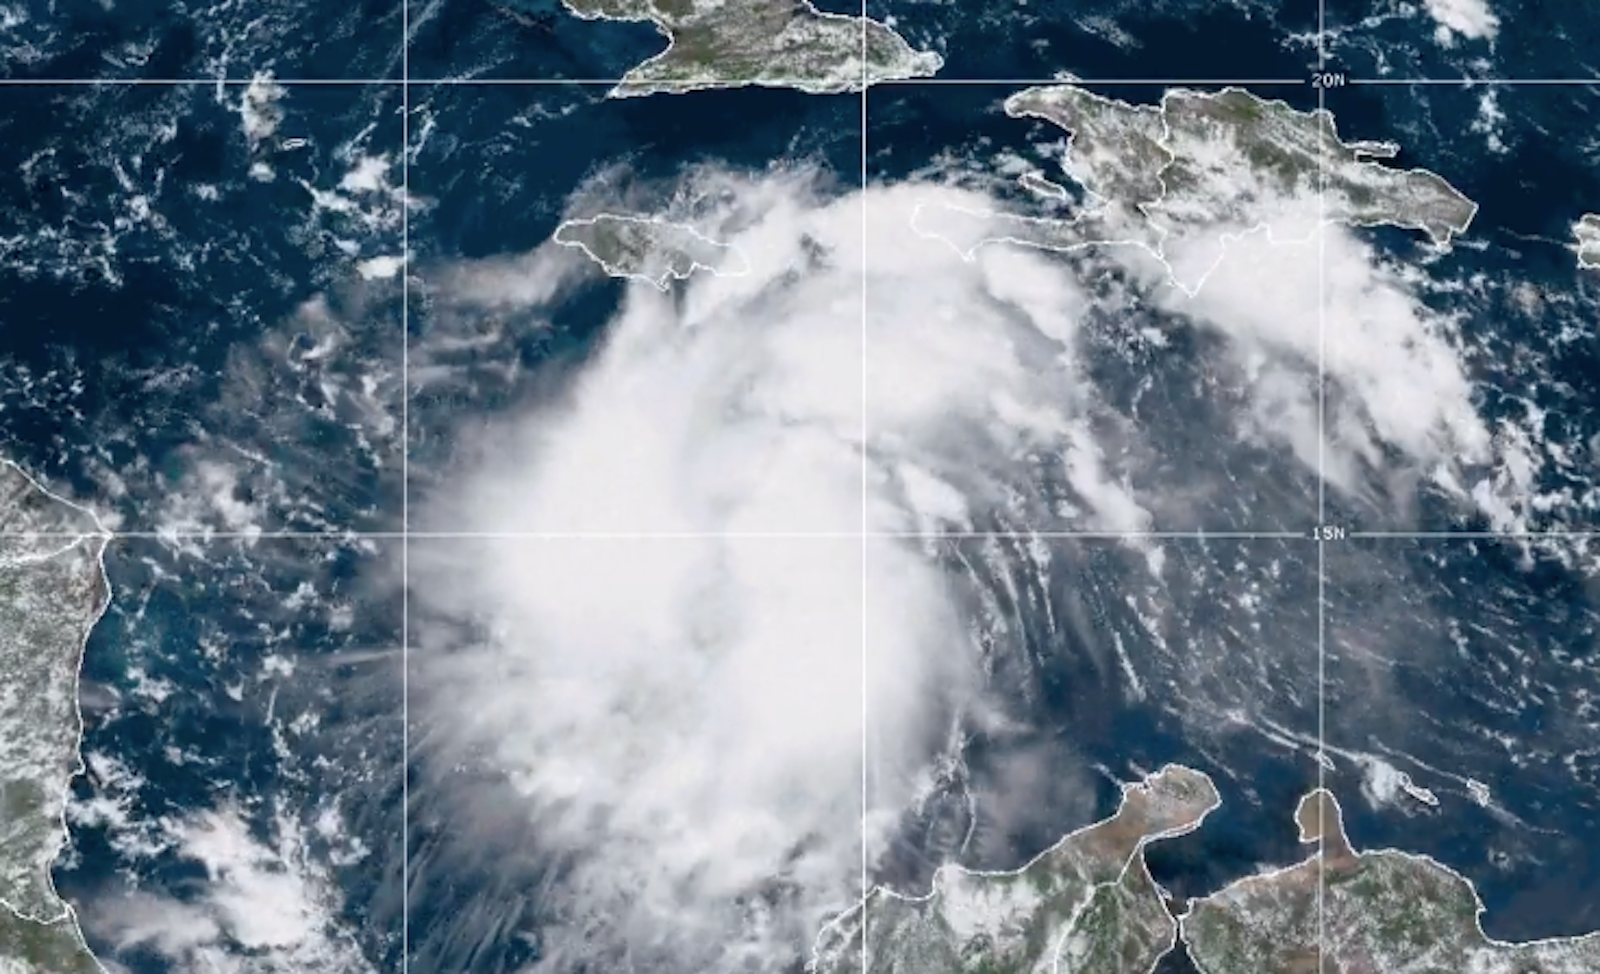 Ian beginning to affect travel with potential to reach US as major hurricane